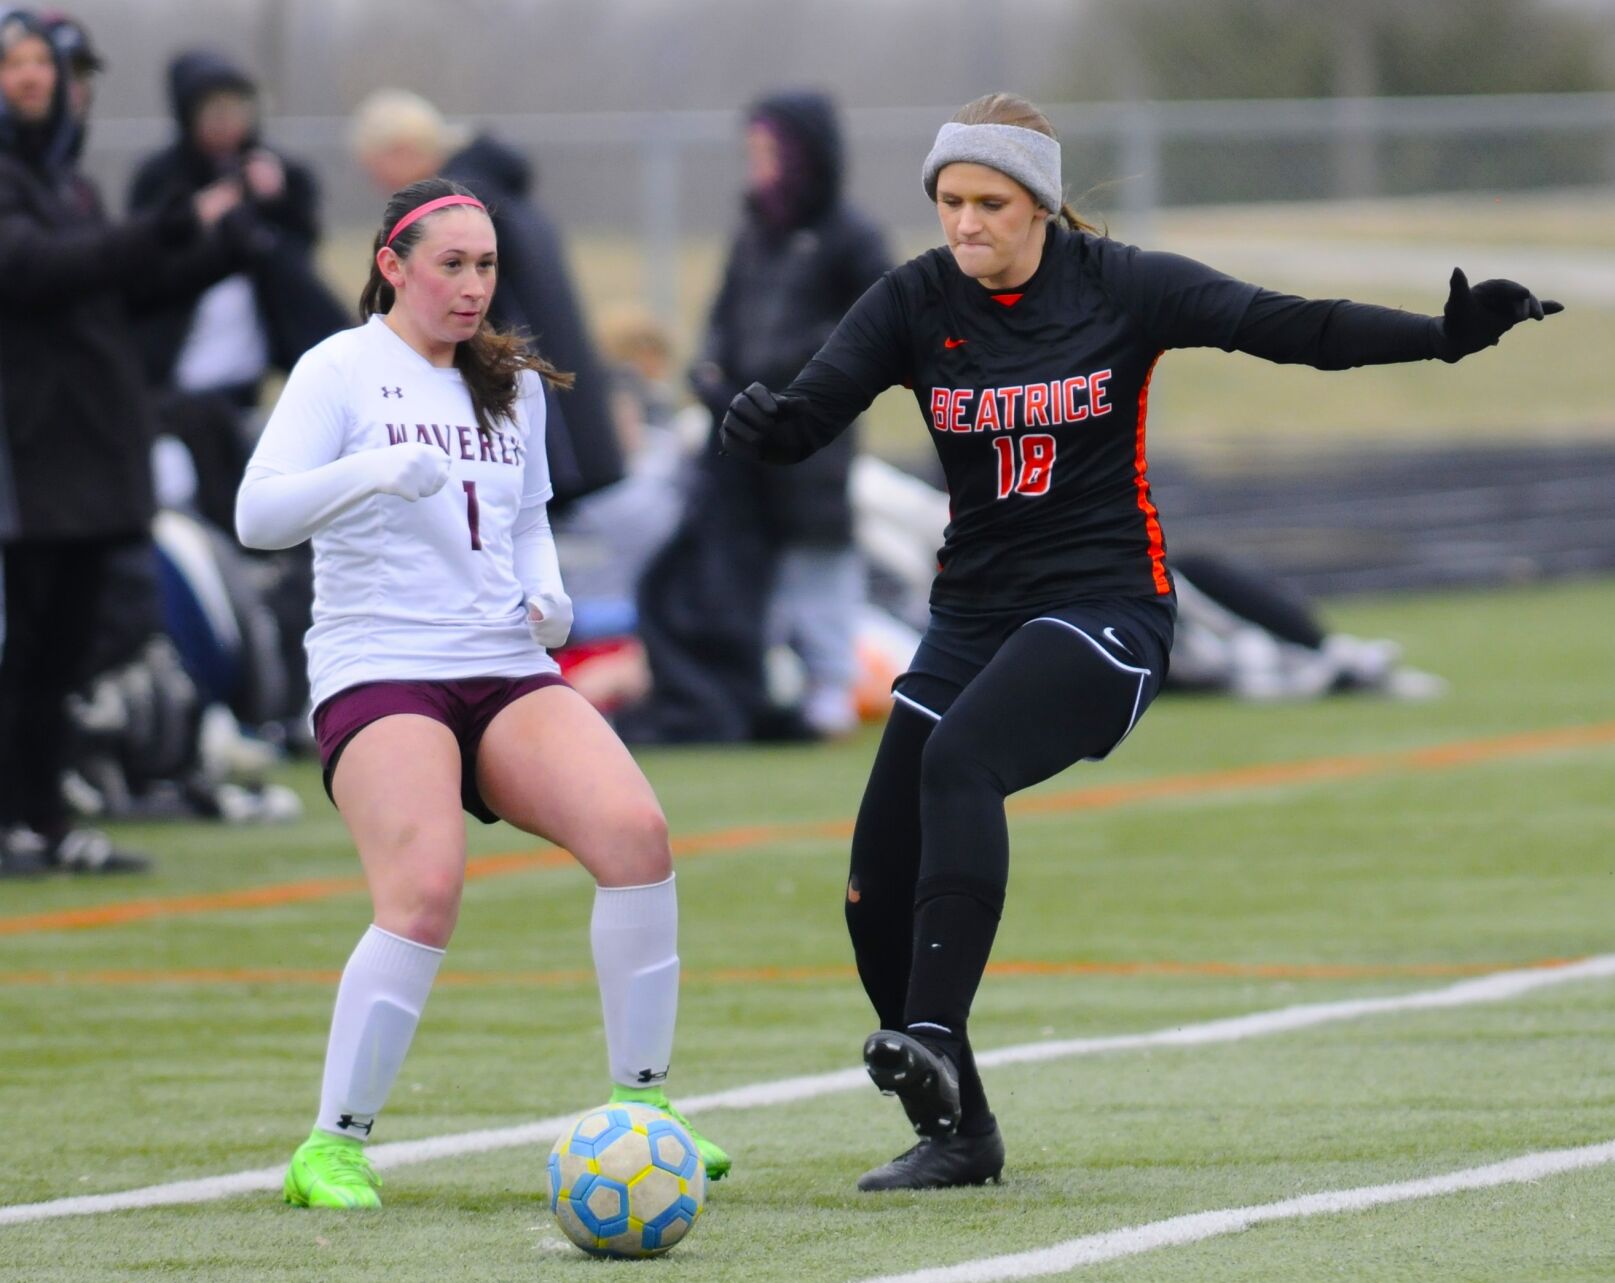 Beatrice Girls Soccer faces tough loss to Waverly but shows promising teamwork and improvement in recent games